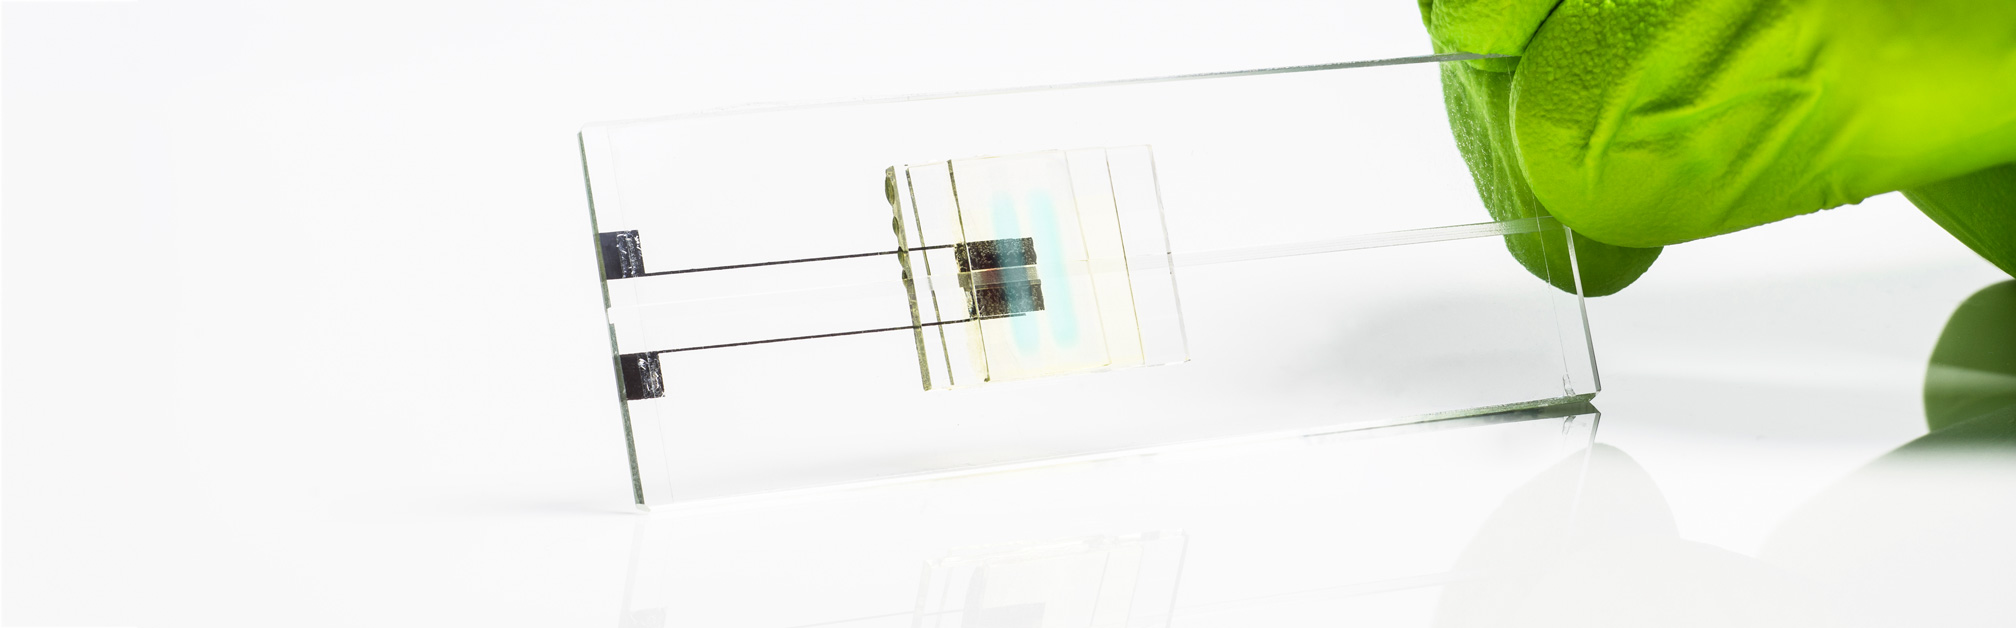 Inkjet-printed functionalities for flexible and low-cost Lab-on-Chip systems.